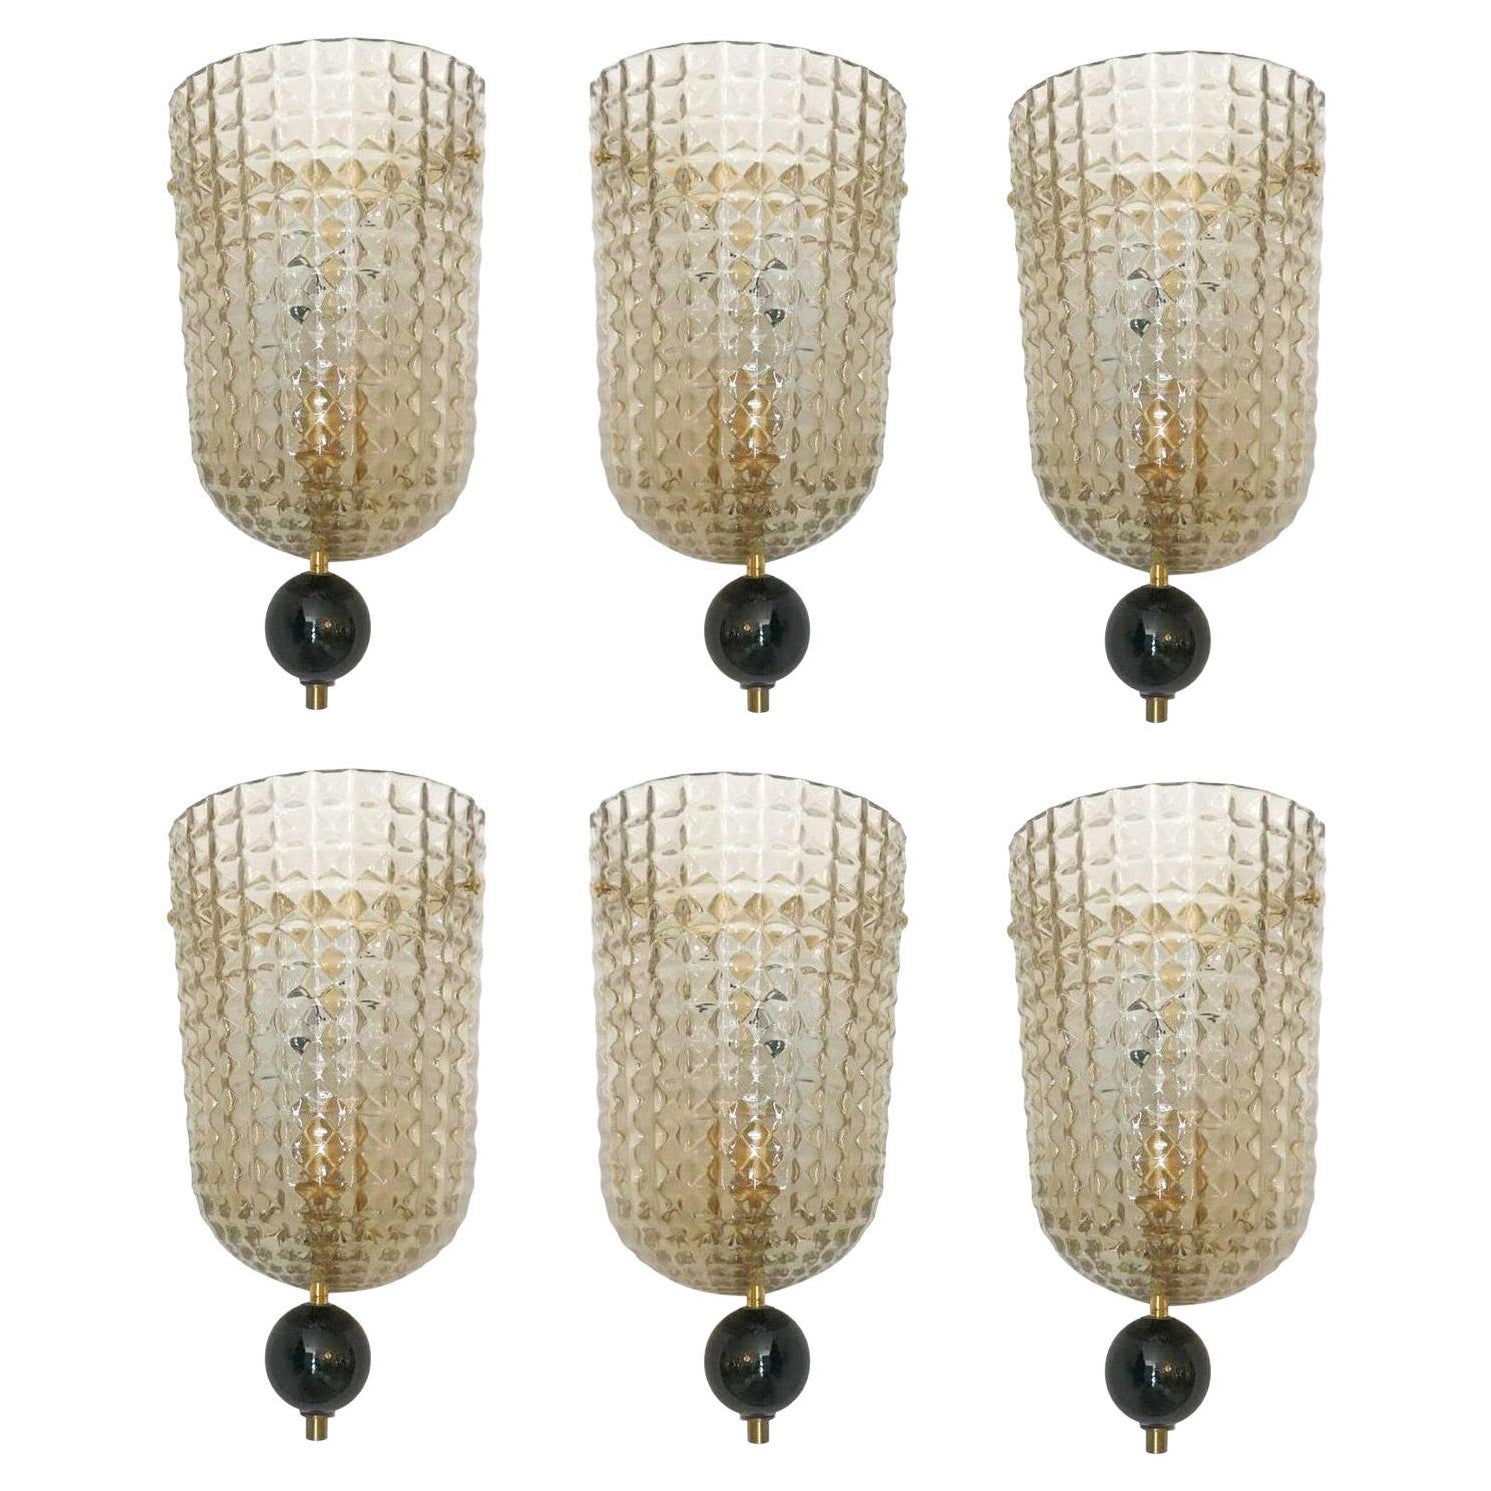 Set of Six Art Deco Style Murano Glass Demi-Lune Wall Lights Sonces, in Stock